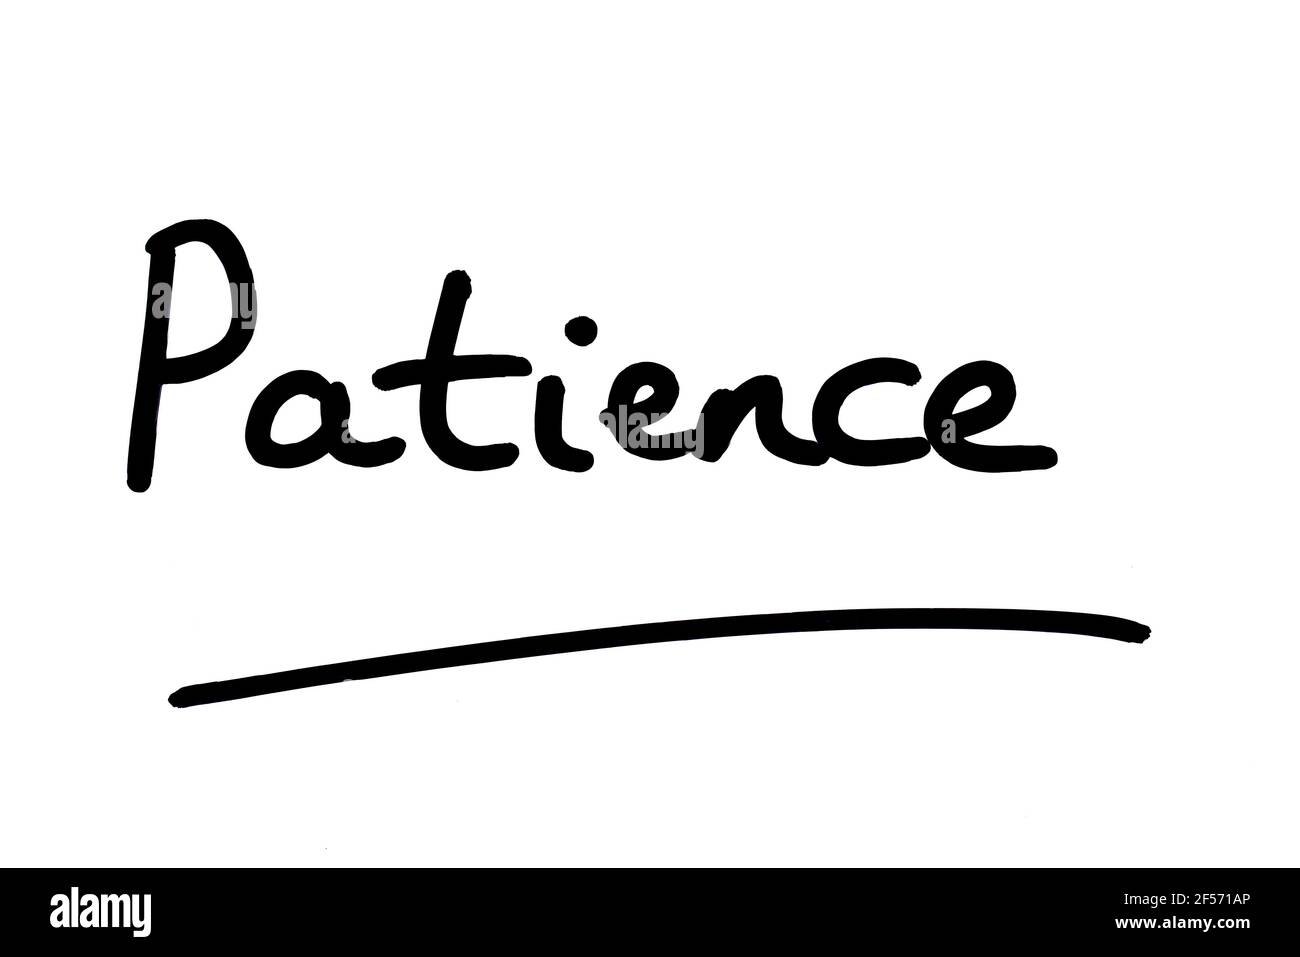 Patience, handwritten on a white background. Stock Photo